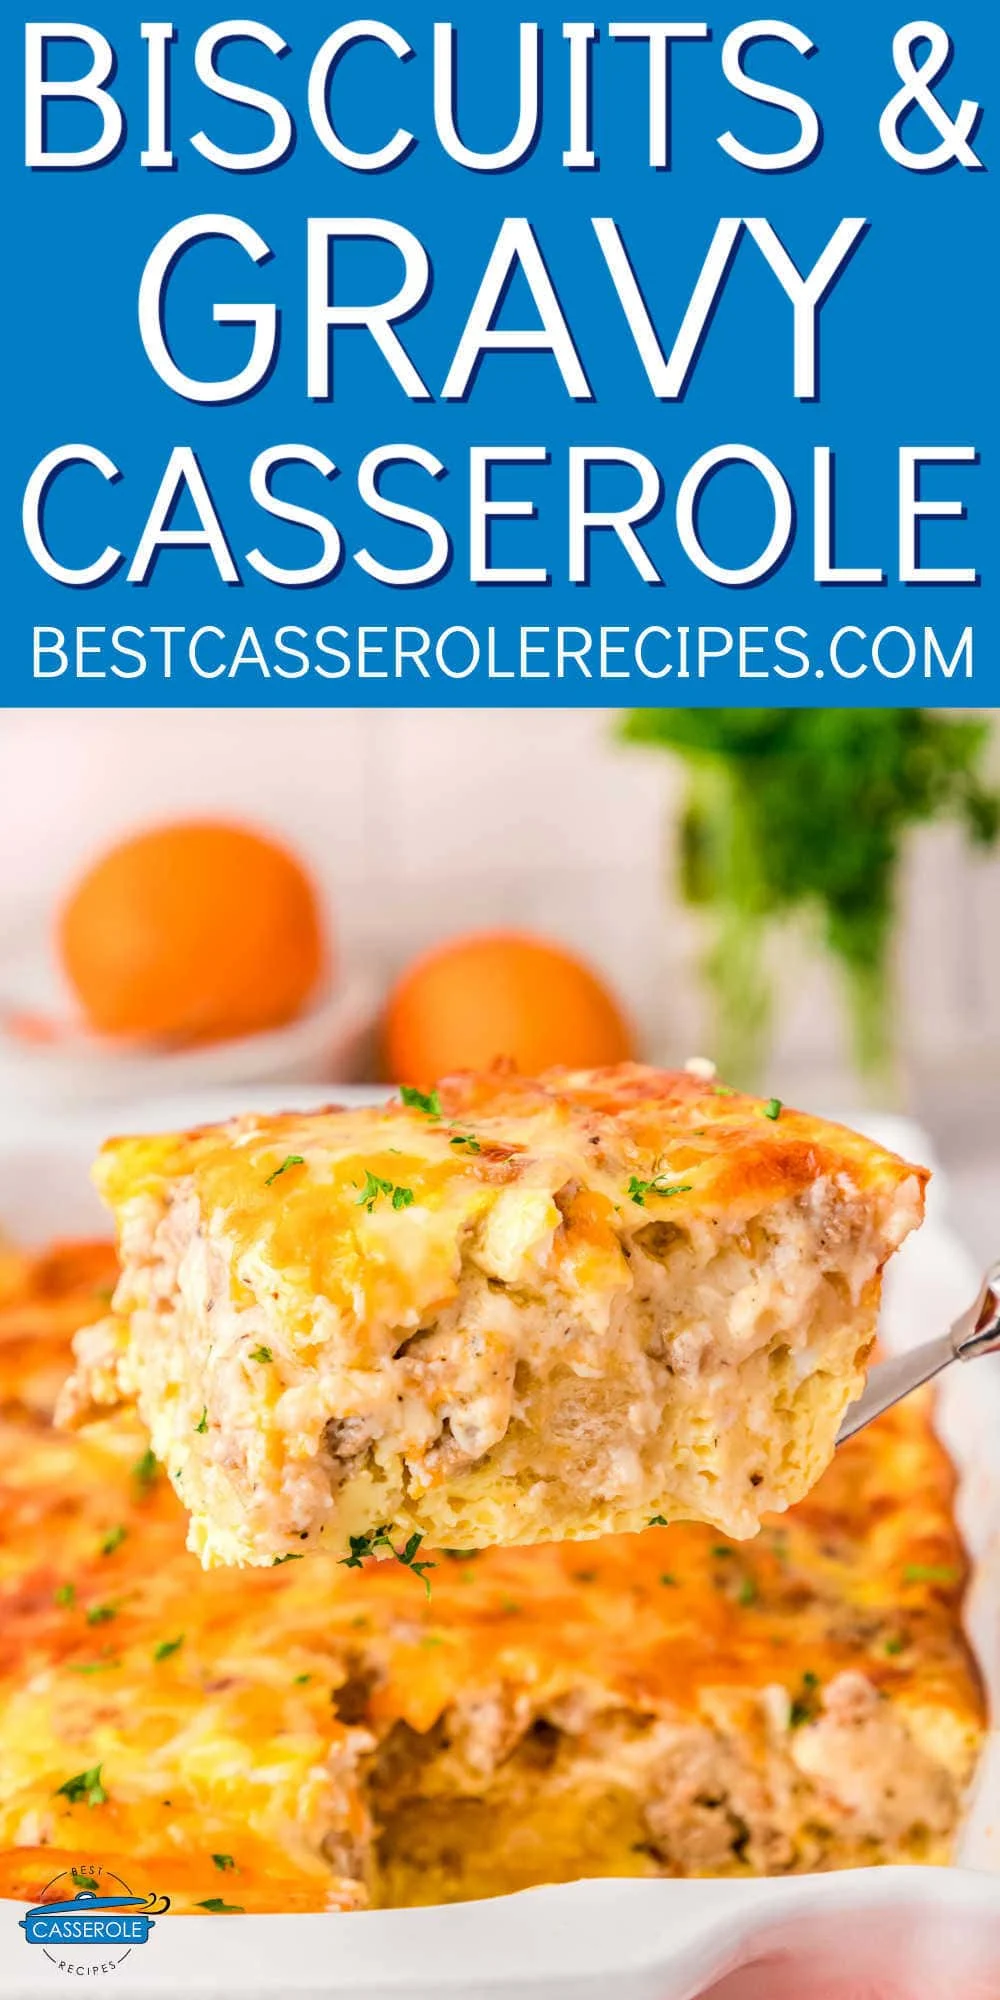 slice of casserole with text "Biscuits & Gravy"